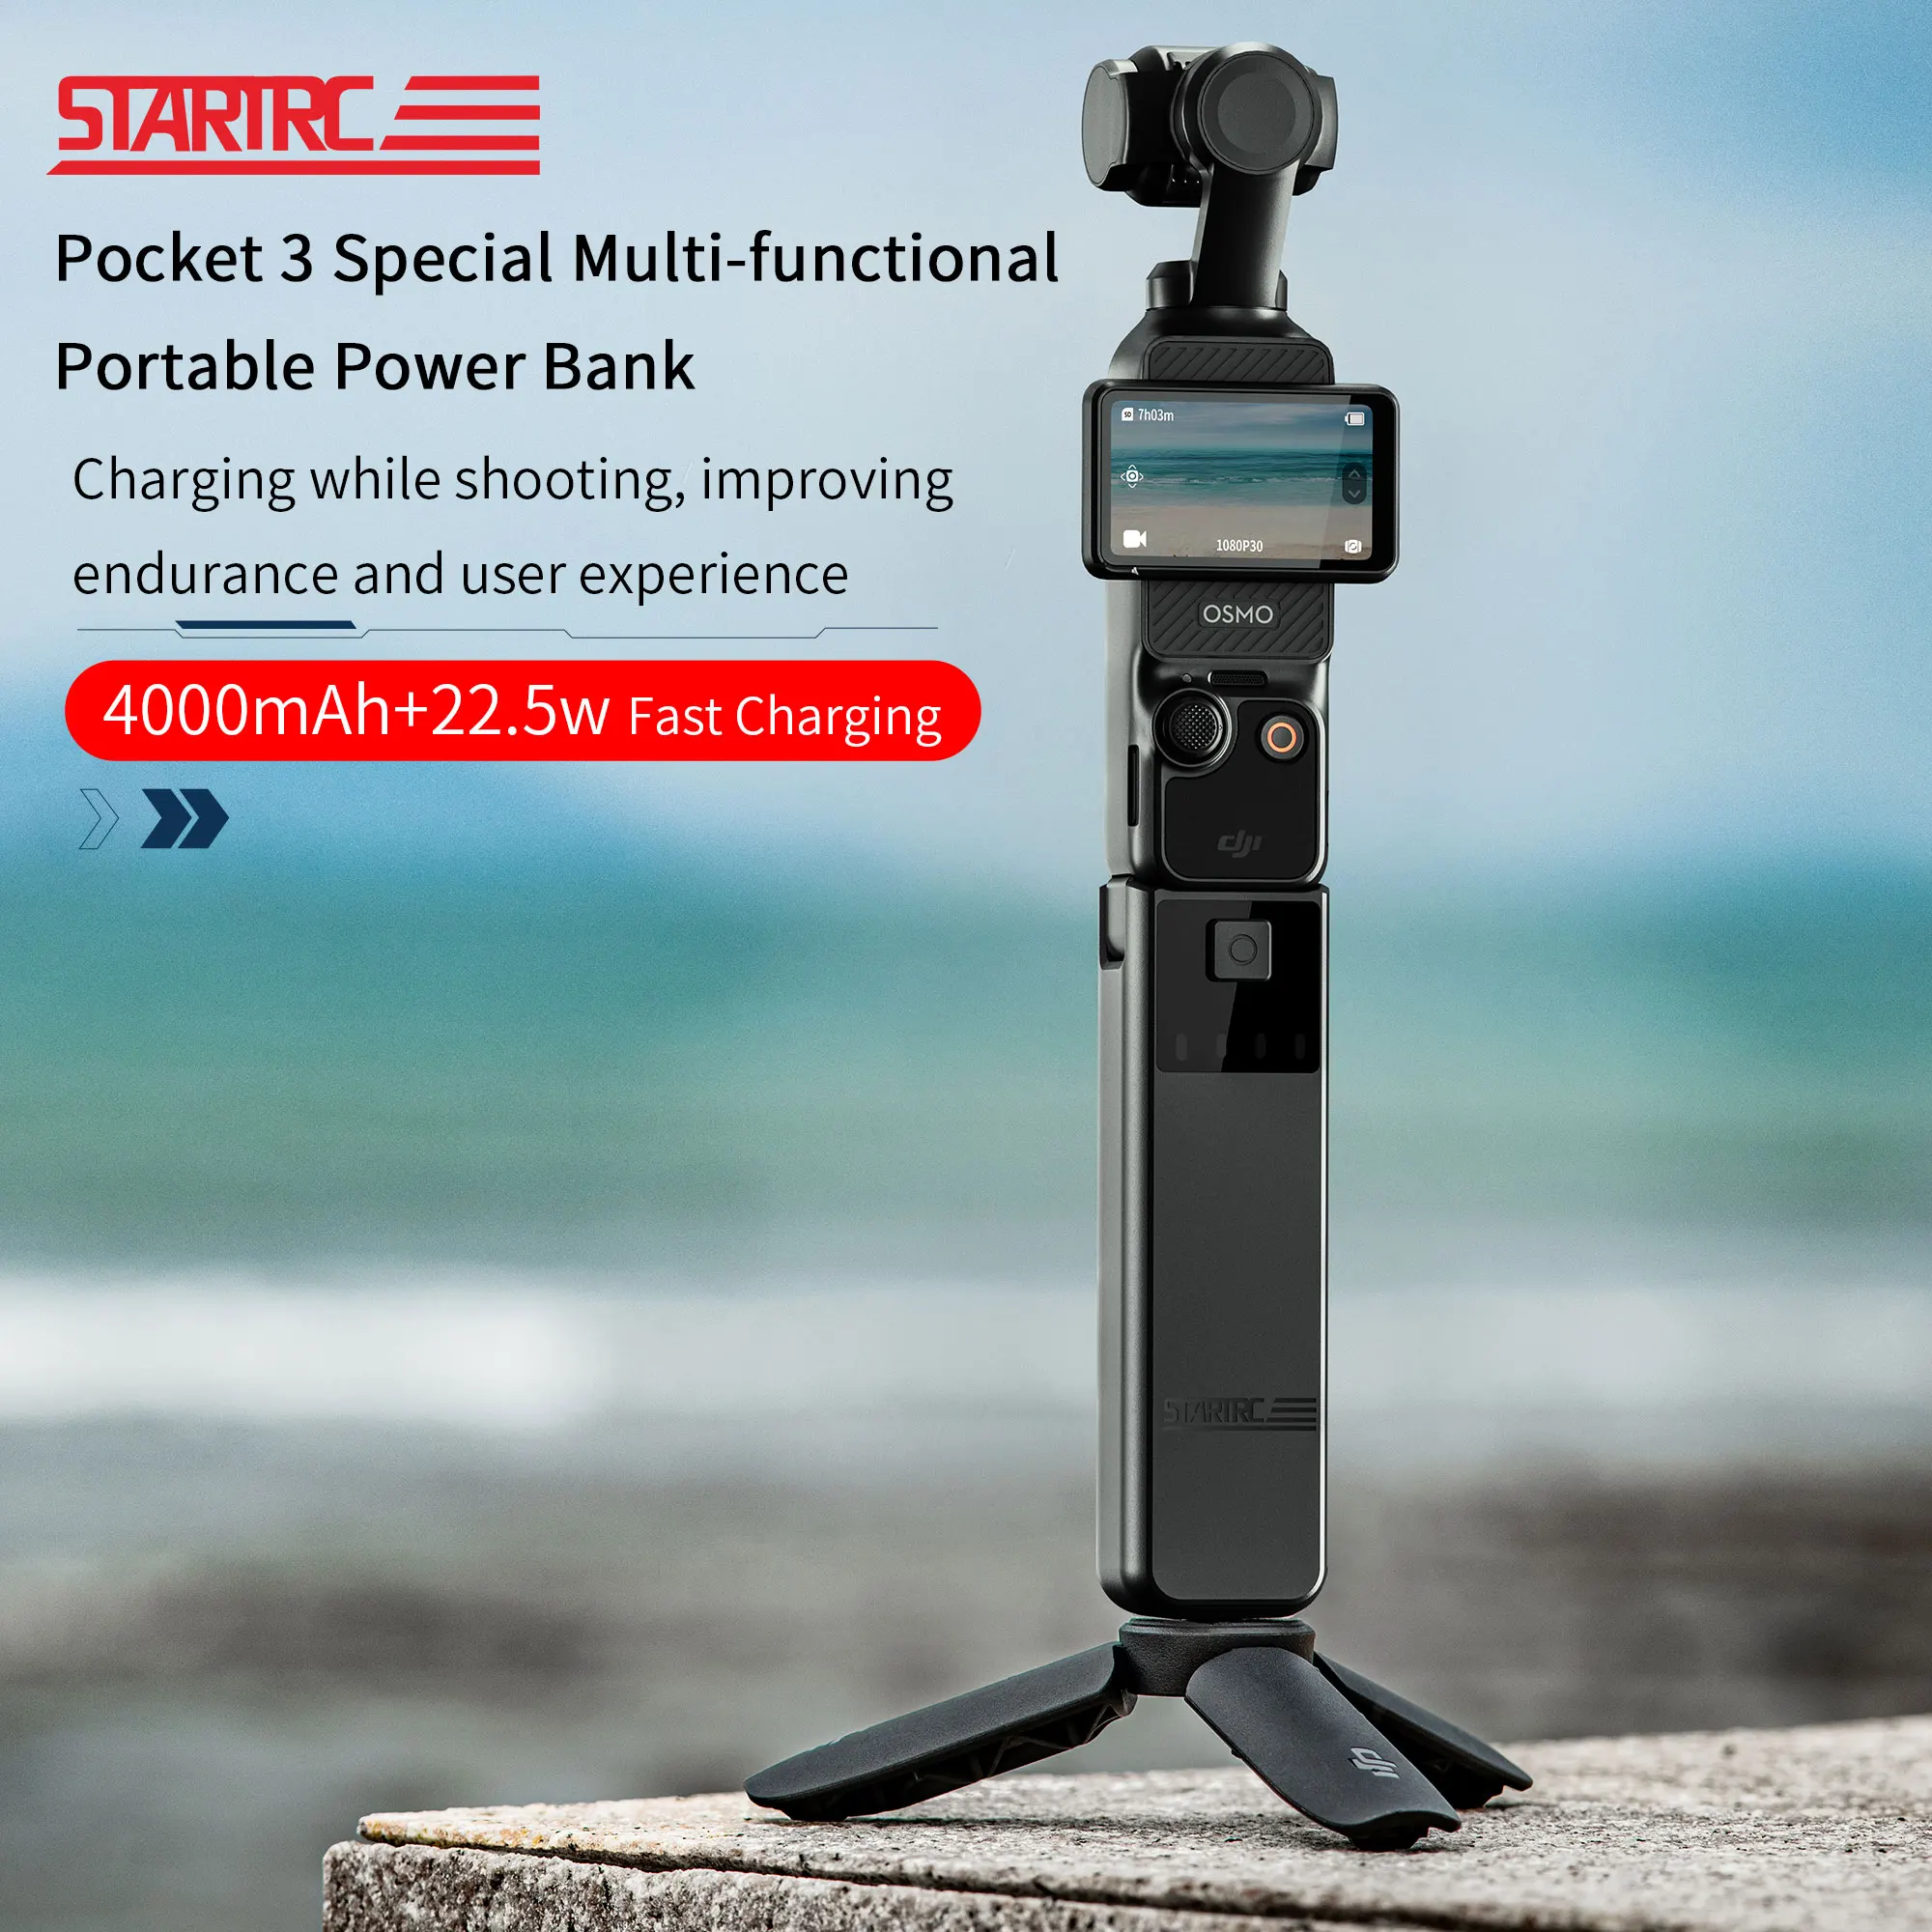 

STARTRC DJI Pocket 3 Power Bank 4000mAh Mobile Portable Fast Charging Charger Handheld Camera Extension Rod for OSMO Pocket 3